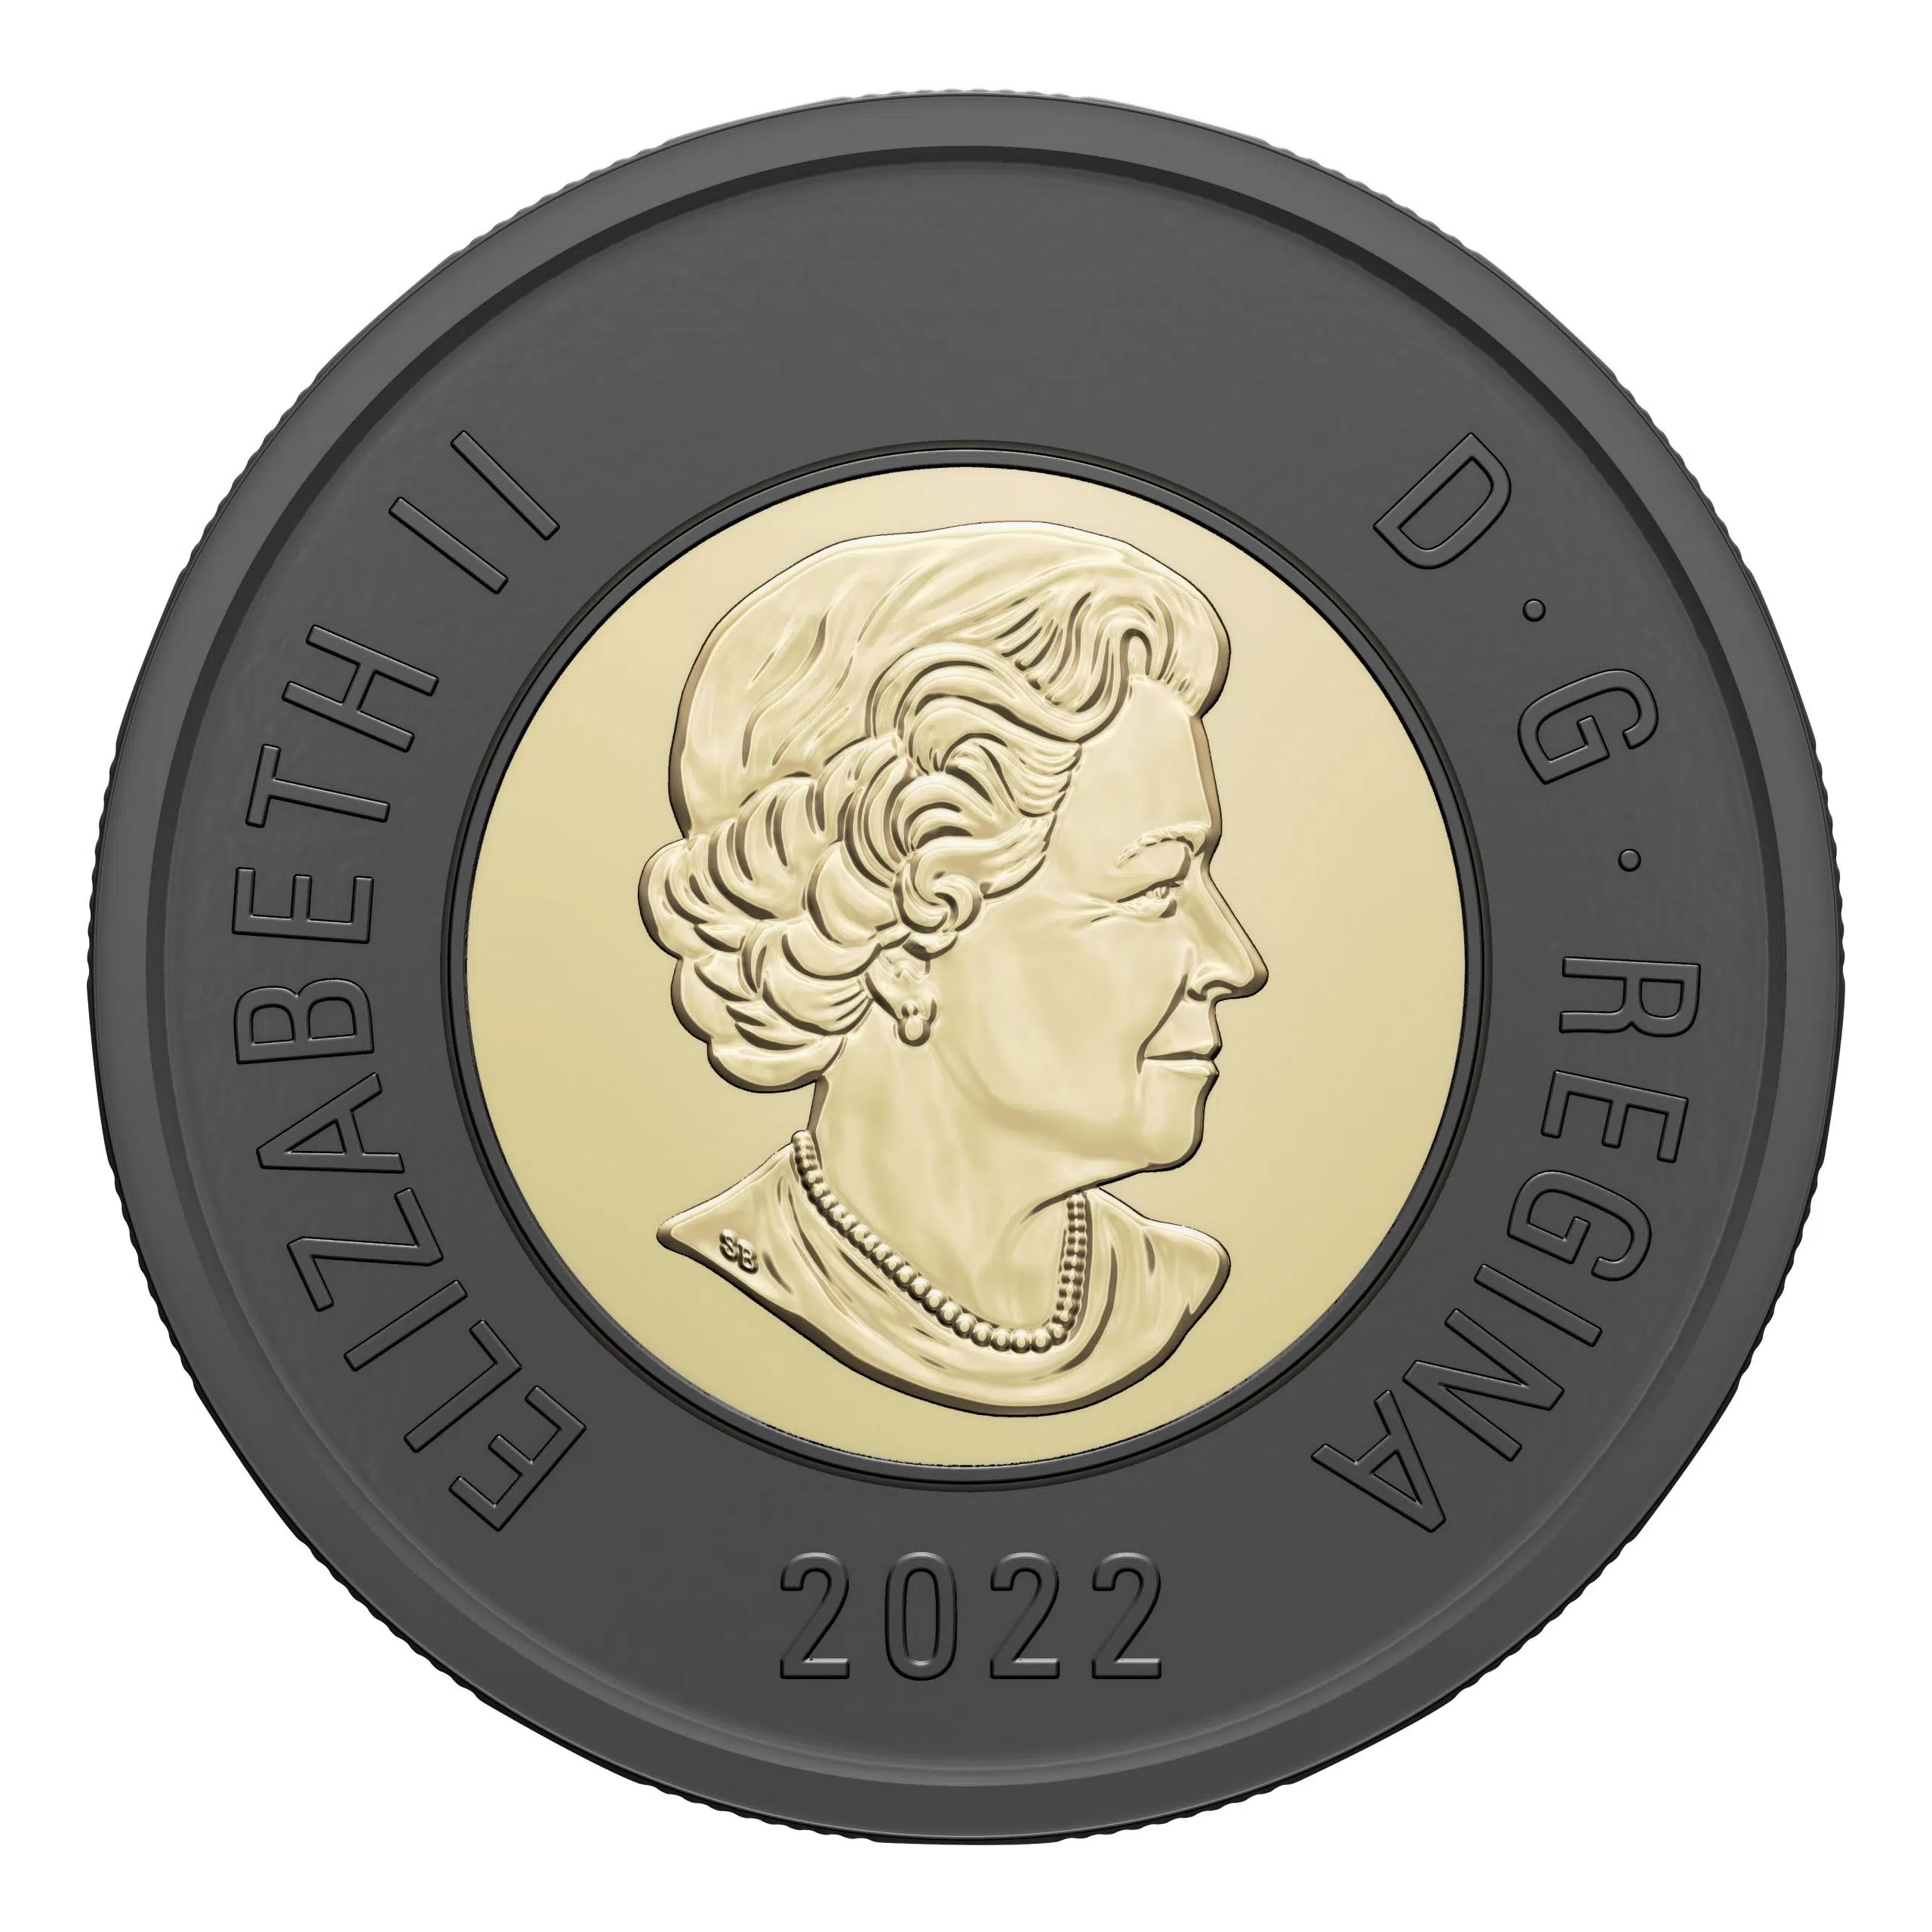 New $2 Coin To Honour Memory Of Late Queen Elizabeth II